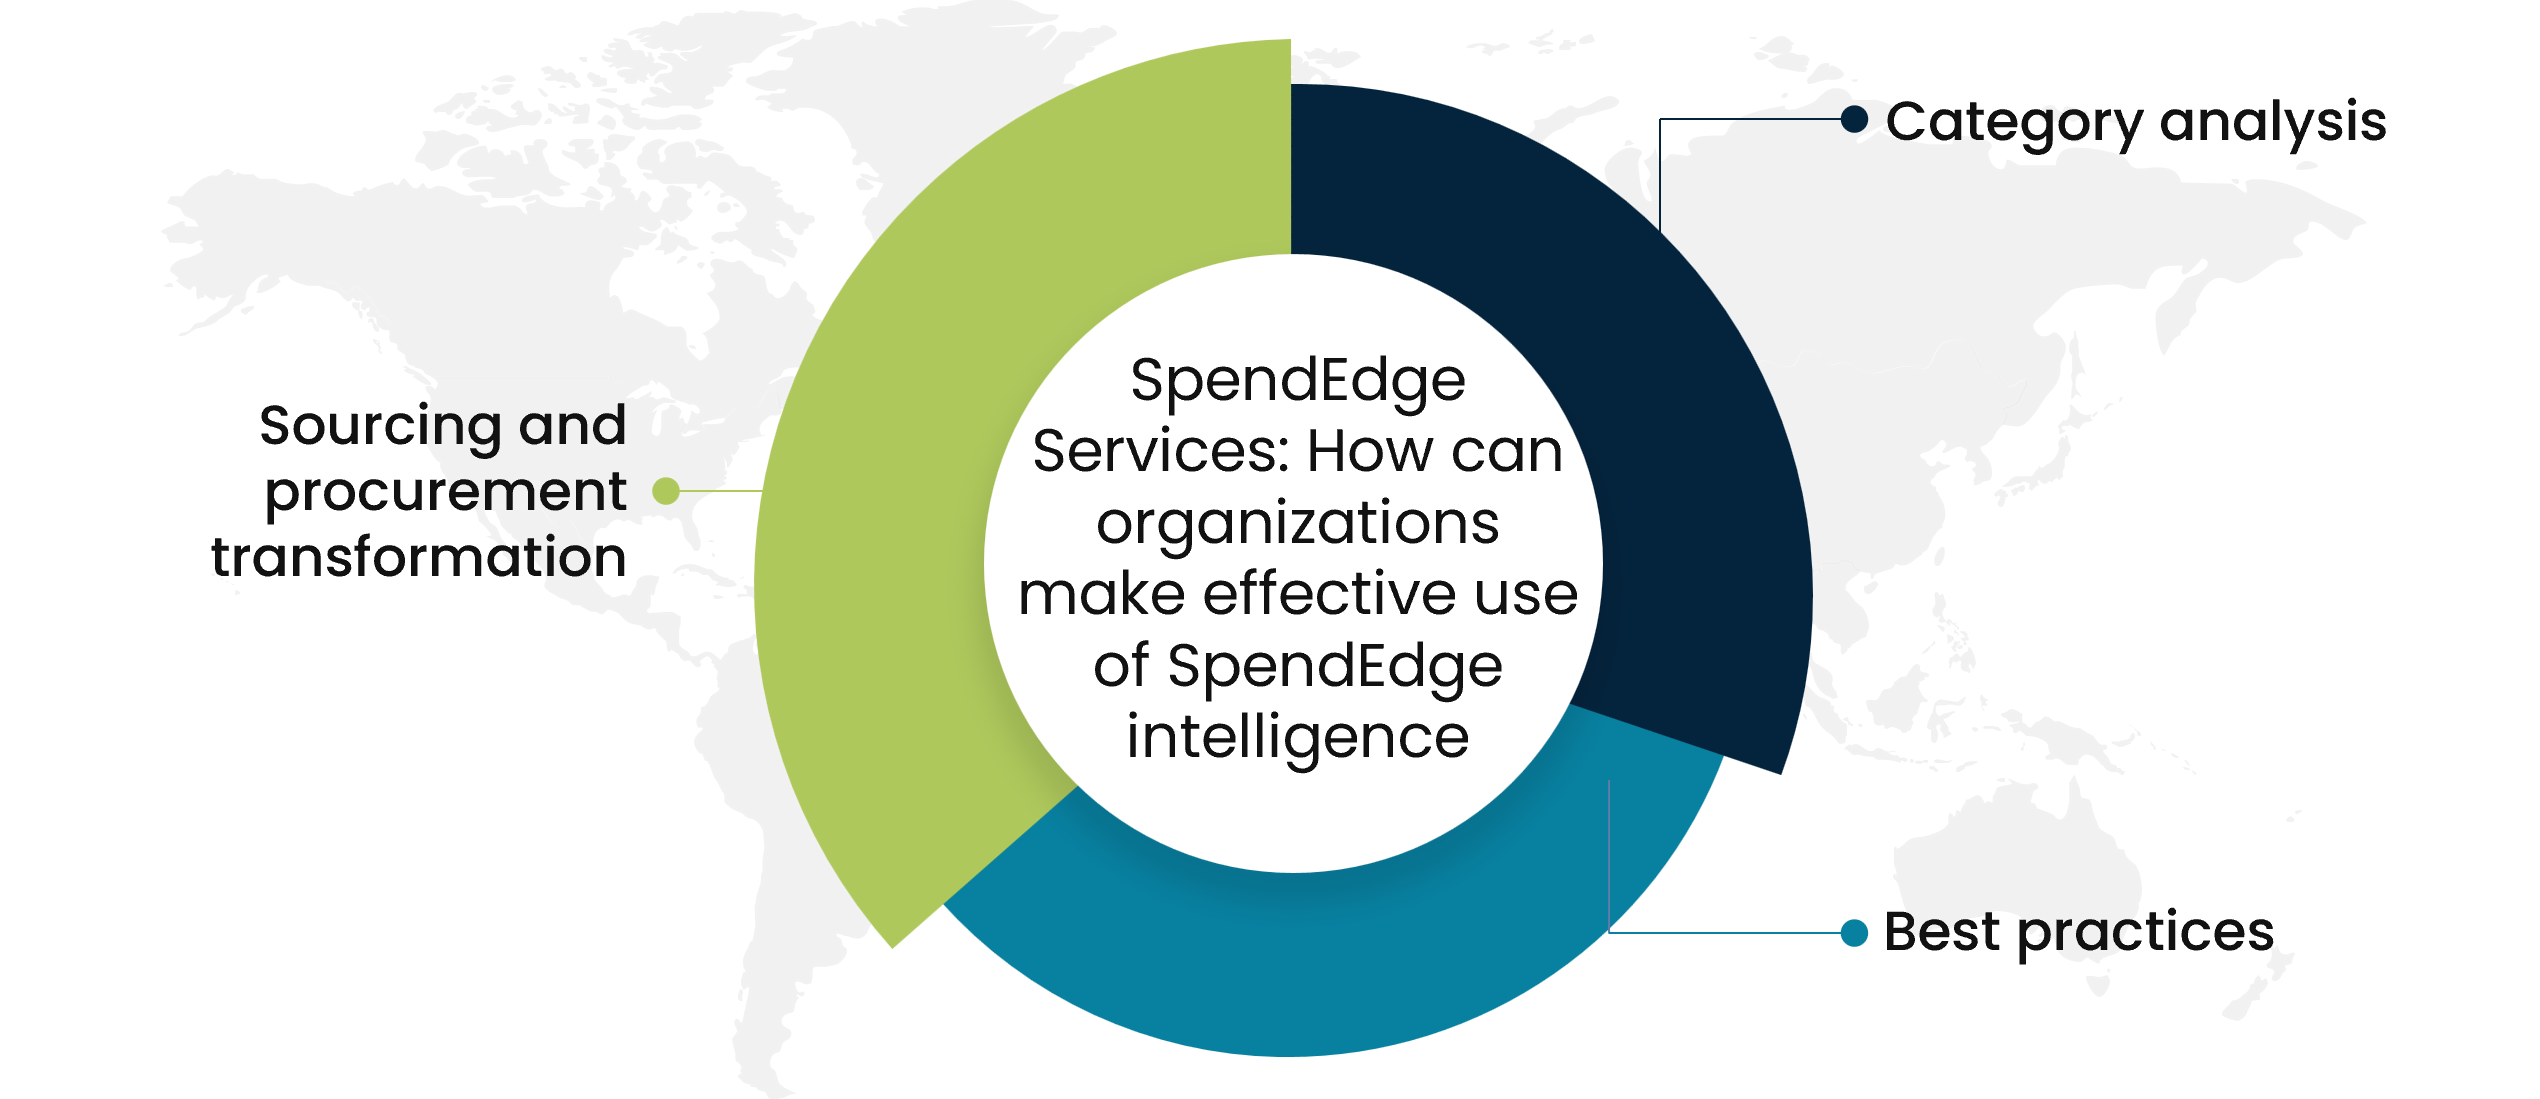 SpendEdge Services: How can organizations make effective use of SpendEdge intelligence